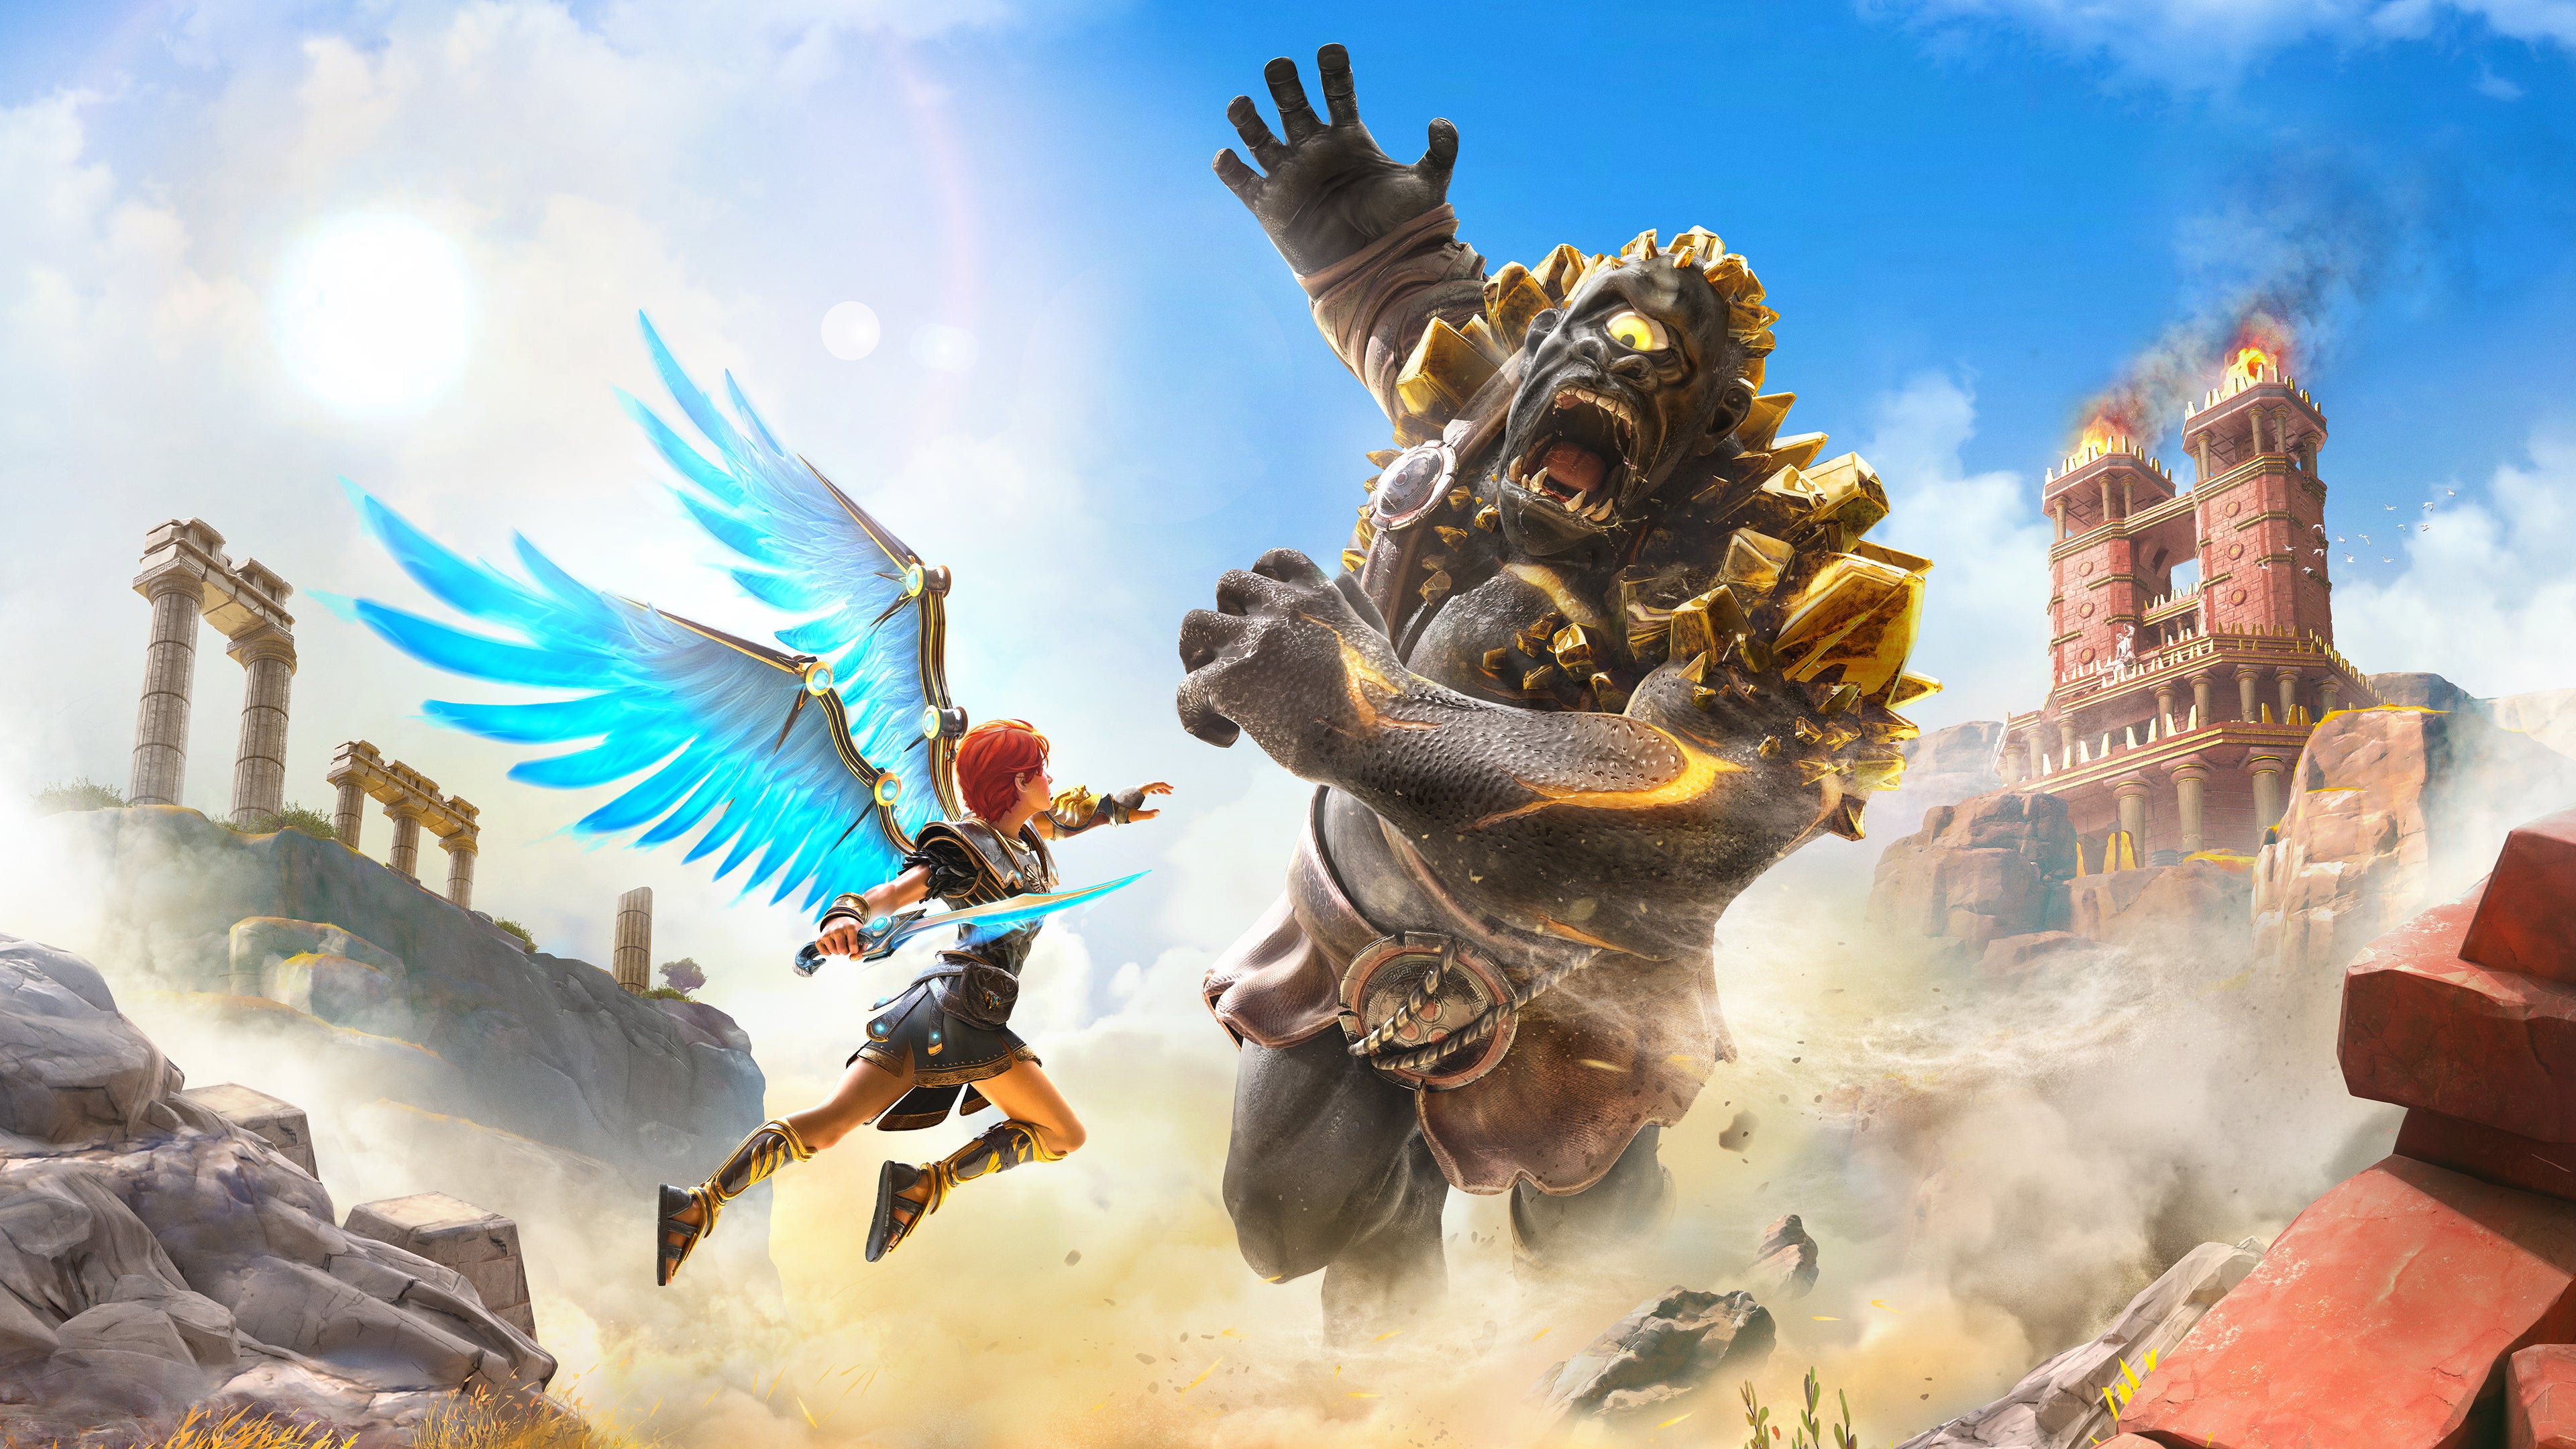 Fenyx faces off against a giant Cyclops in Immortals Fenyx Rising.